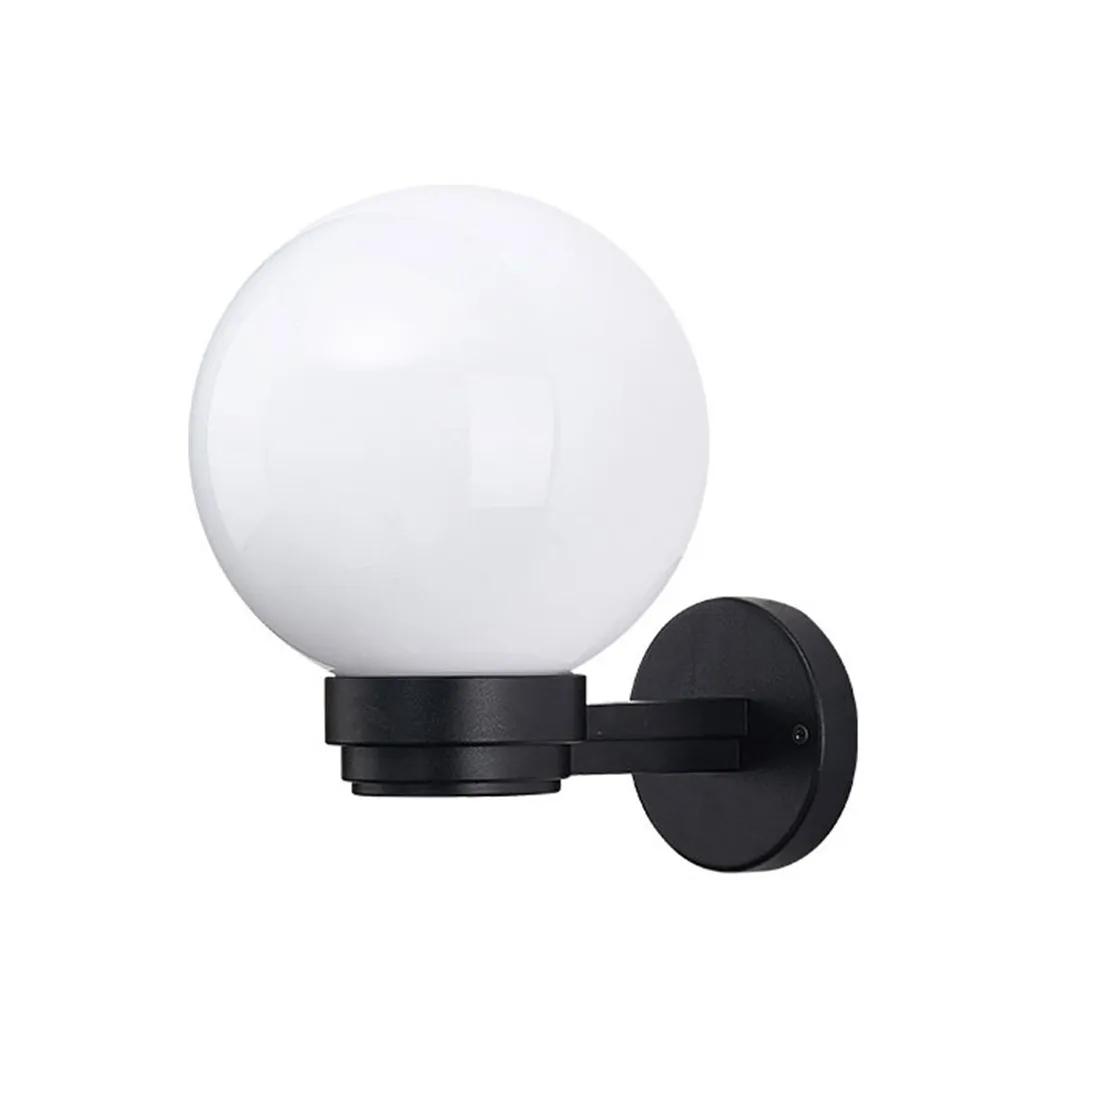 Indoor Outdoor Wall Light with White or Clear Acrylic Globe Shade for Entryway Porch Patio Exterior E27 Base Socket Wall Lantern indoor outdoor wall light with white or clear acrylic globe shade for entryway porch patio exterior e27 base socket wall lantern